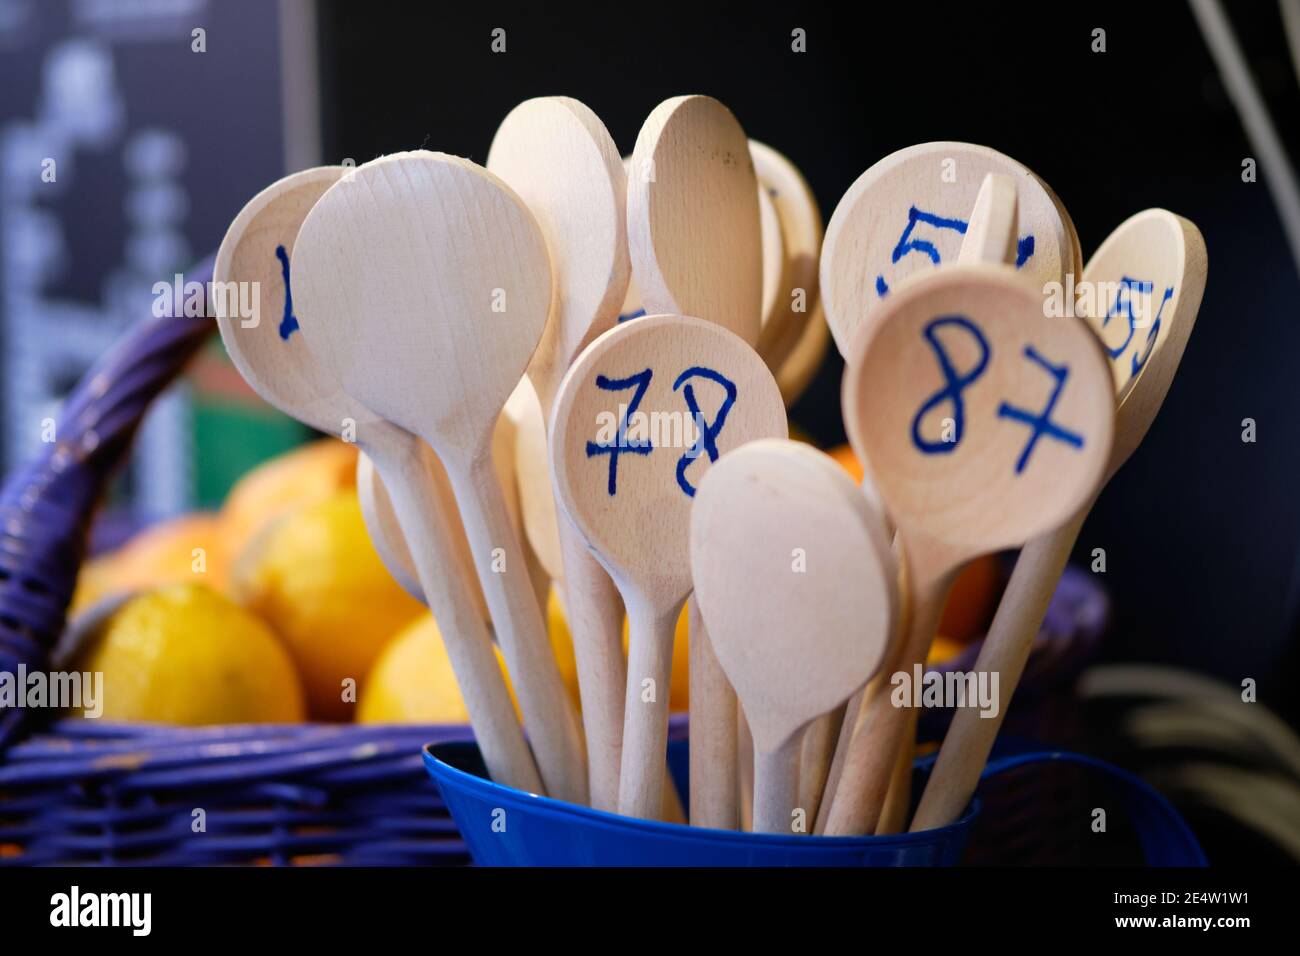 wooden kitchen spoons with numbers on them to be handed out to customers while the wait for food order at market booth Stock Photo